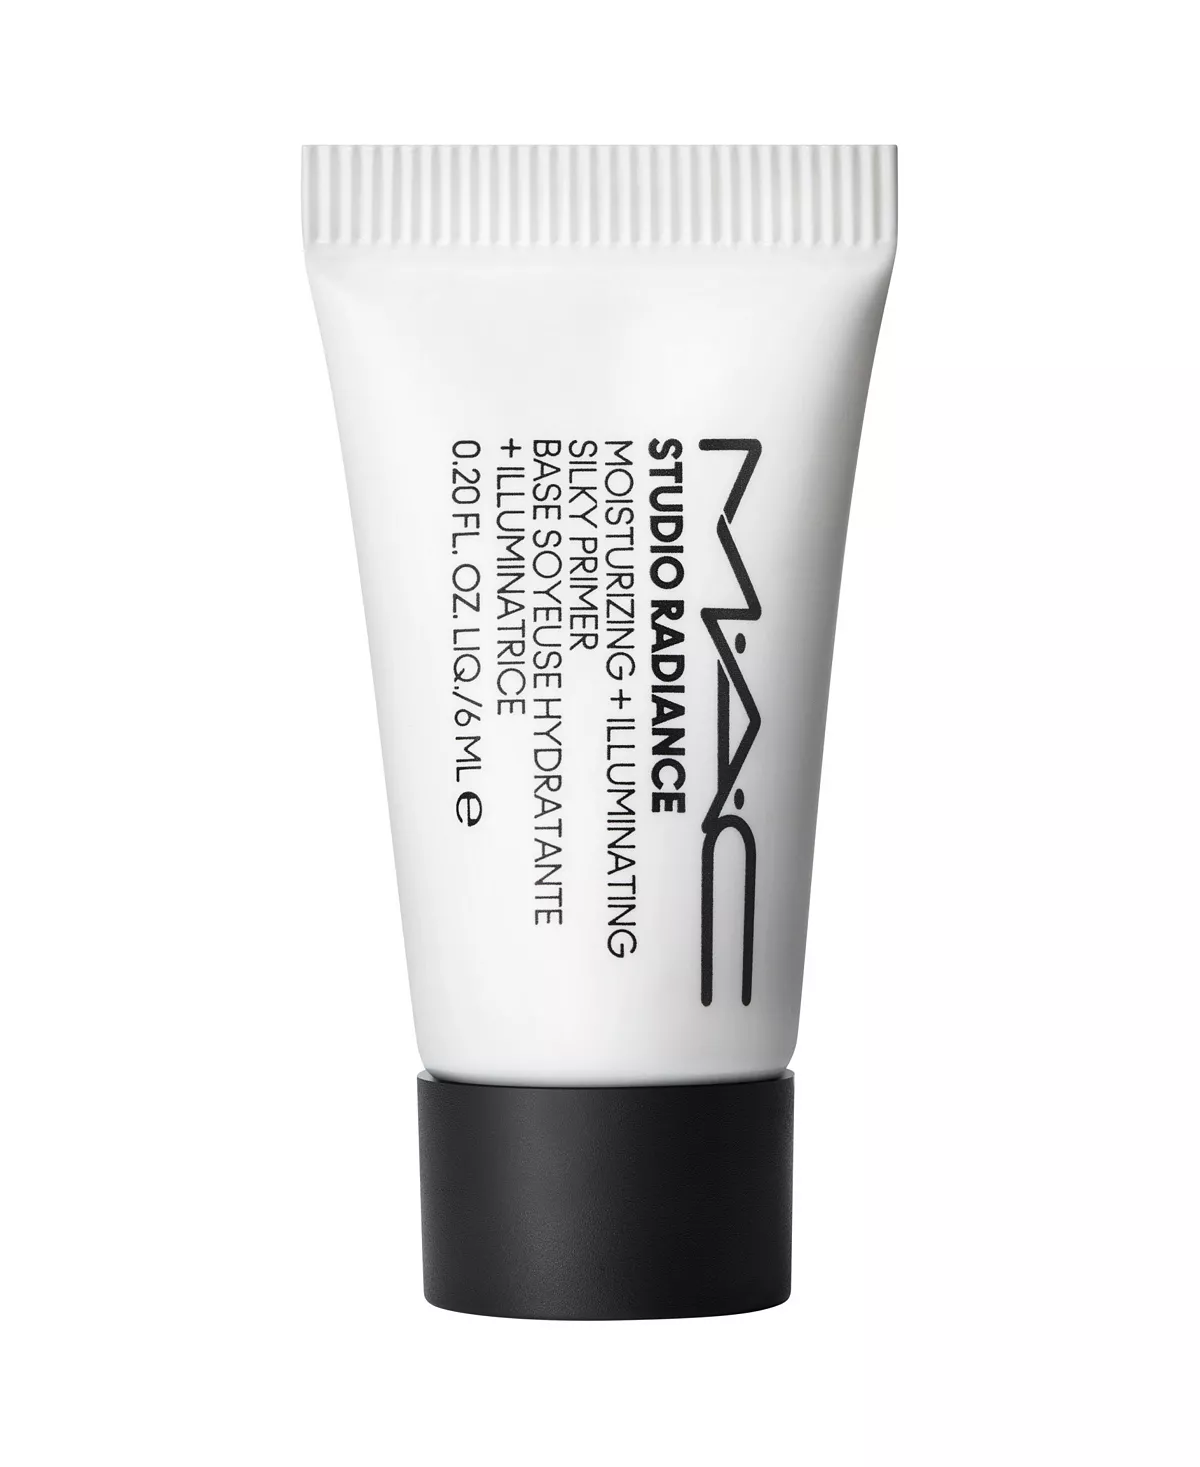 Macys – Free Radiance Primer With Any Mac Purchase!